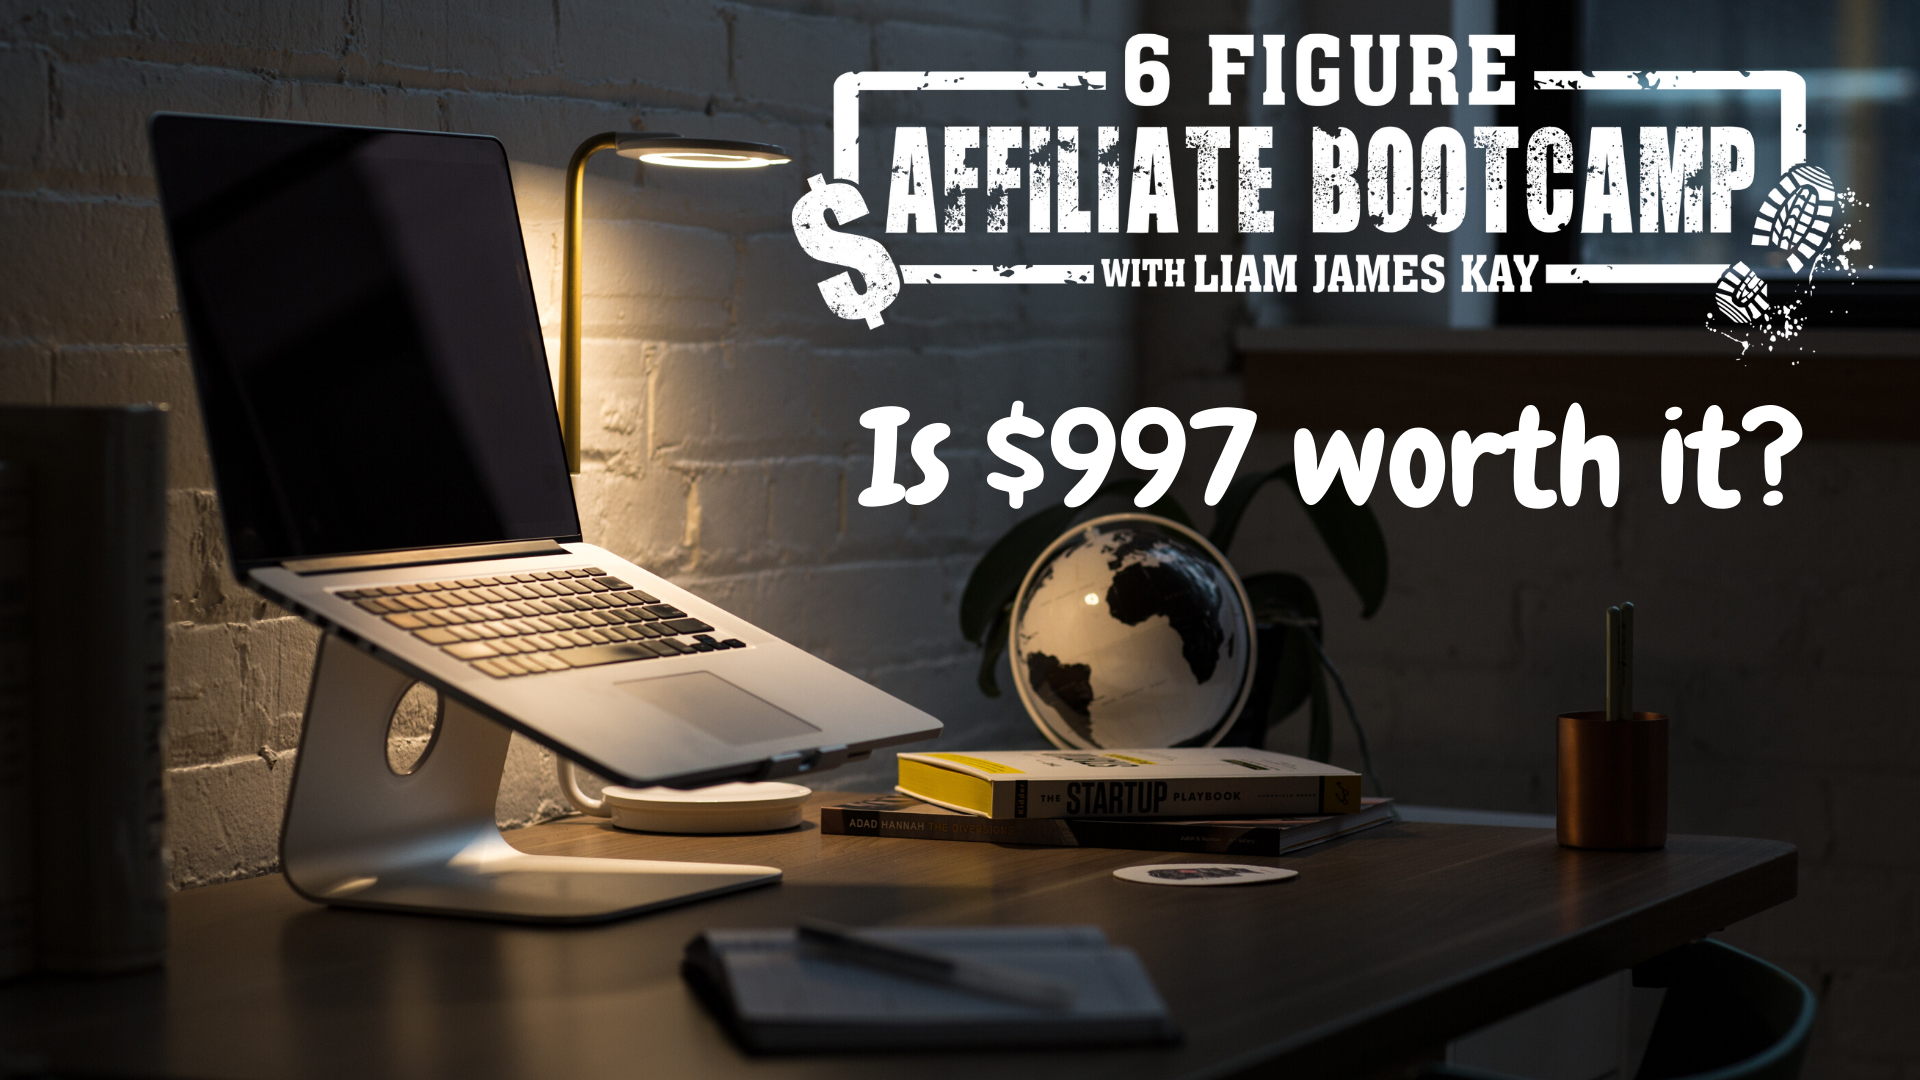 Is 6 Figure Affiliate Bootcamp A Scam